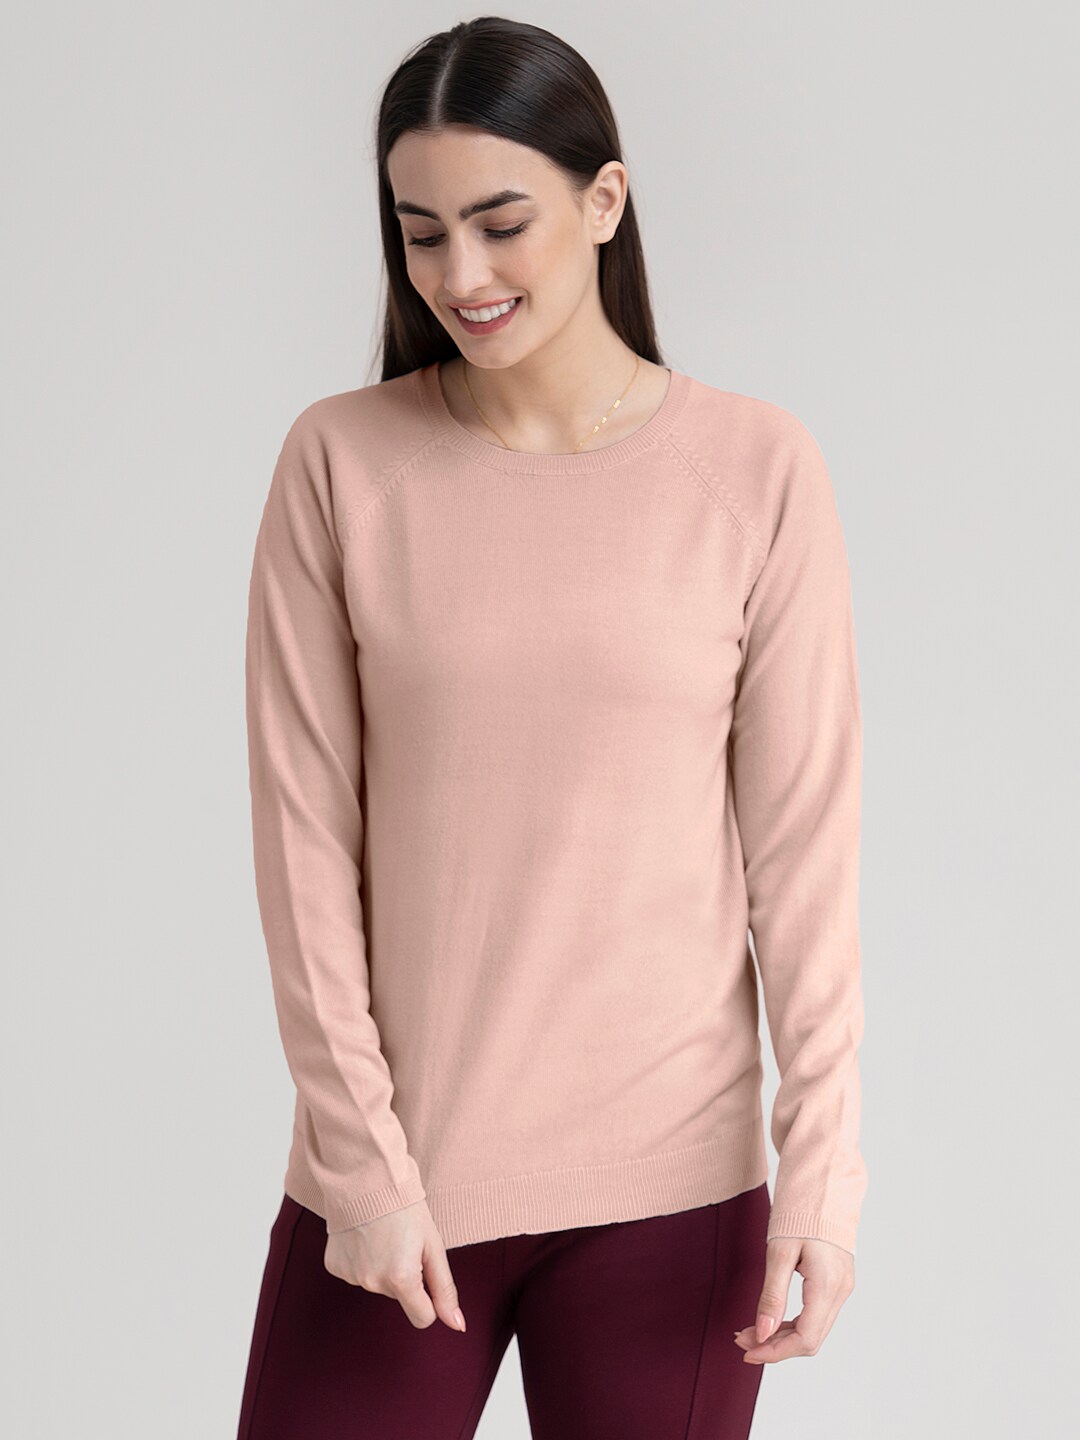 FableStreet Women Pink Solid Acrylic Knit Sweater Price in India